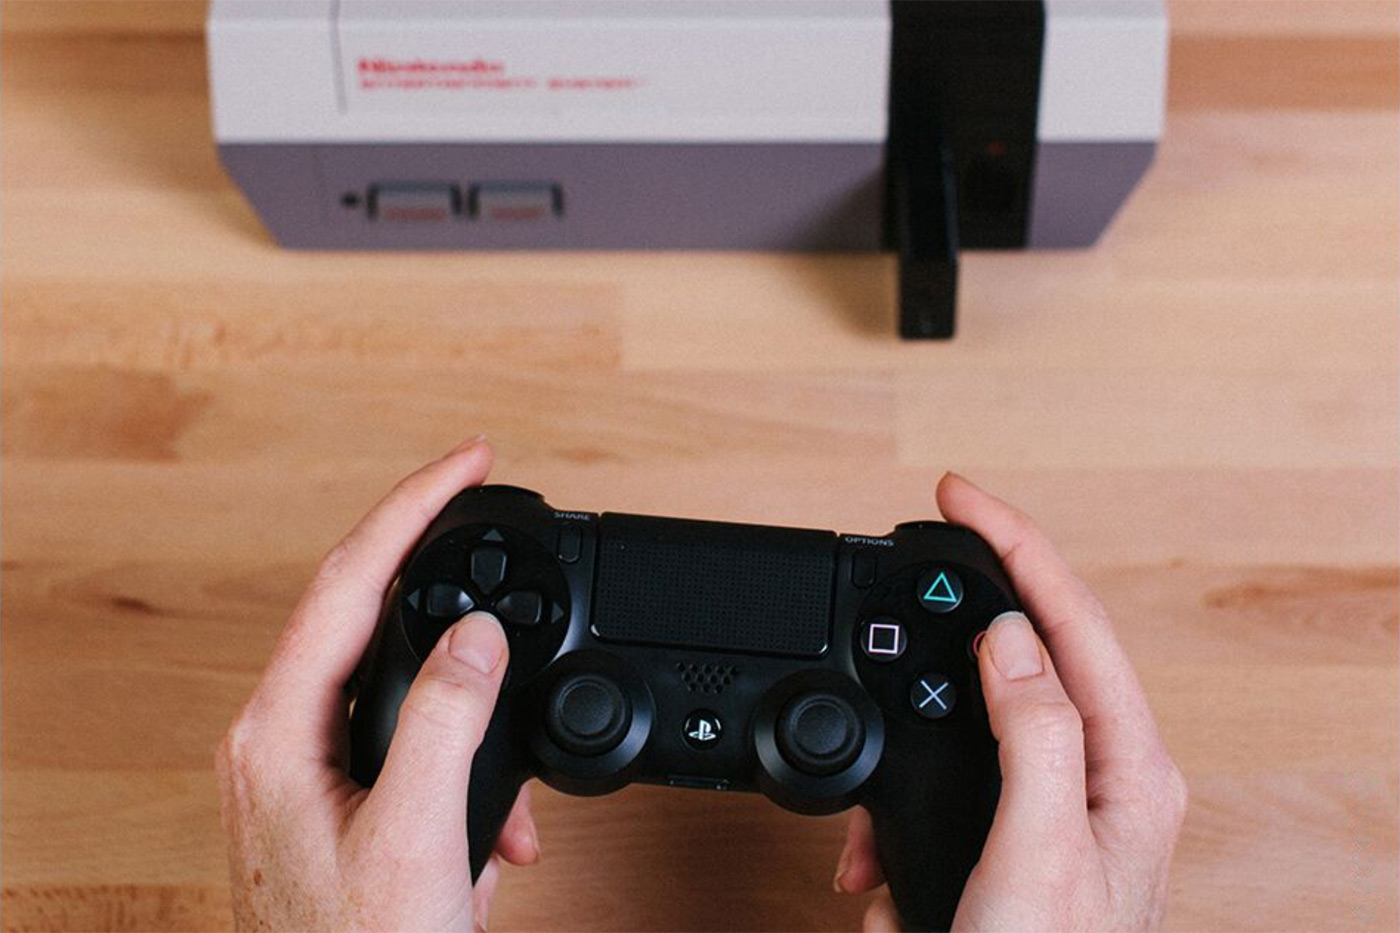 Adapter brings your own wireless gamepads to the NES